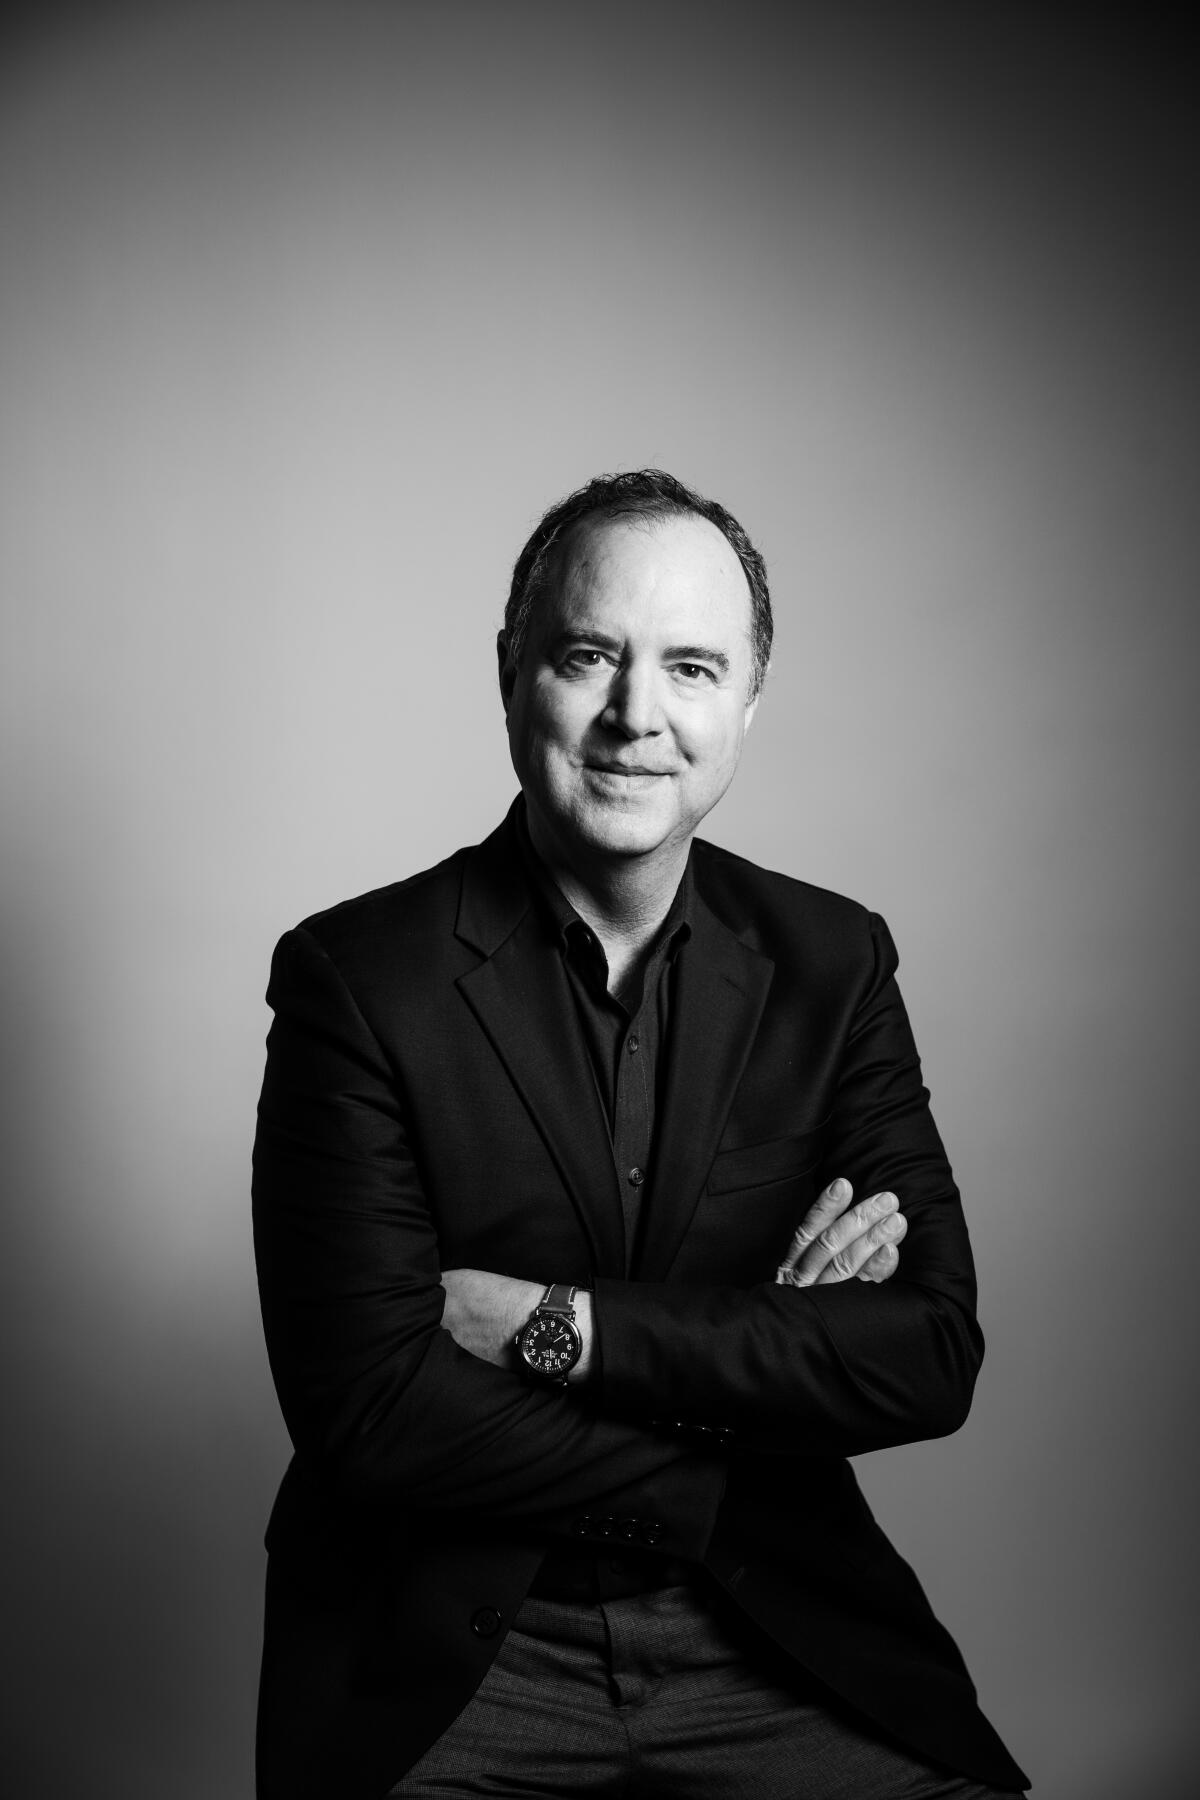  Rep. Adam Schiff is photographed in the L.A. Times Festival of Books photo studio,